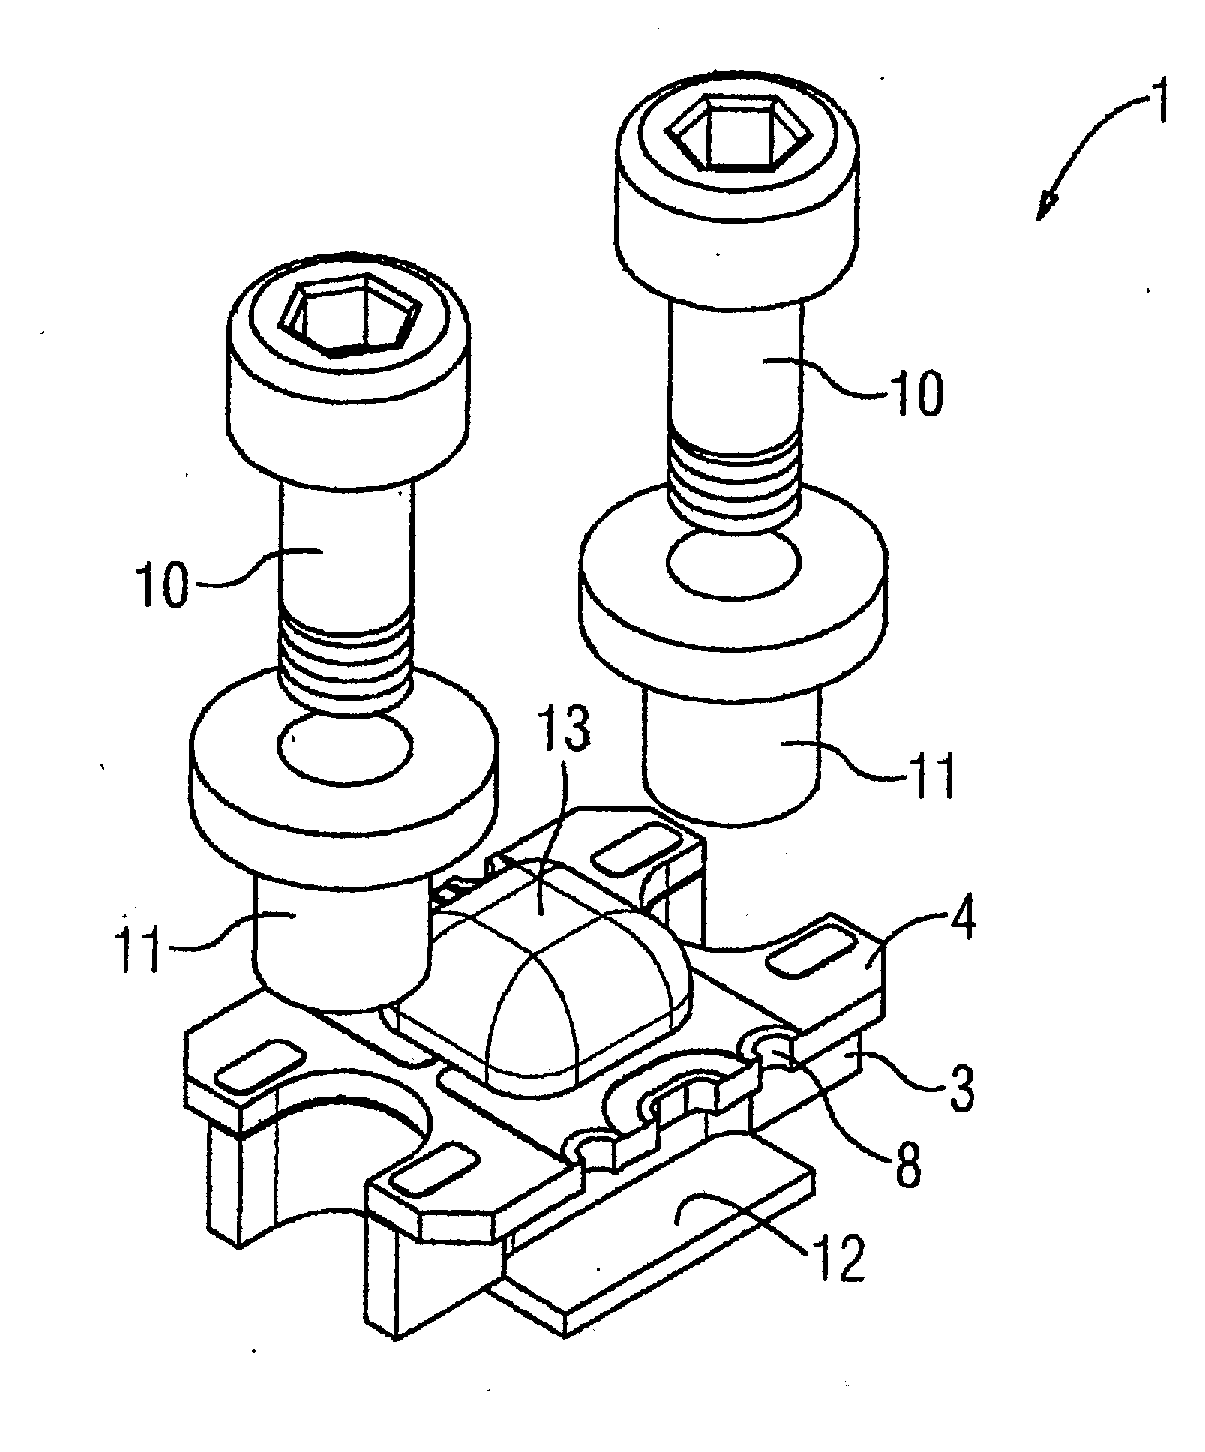 Chip package assembly and method to use the assembly